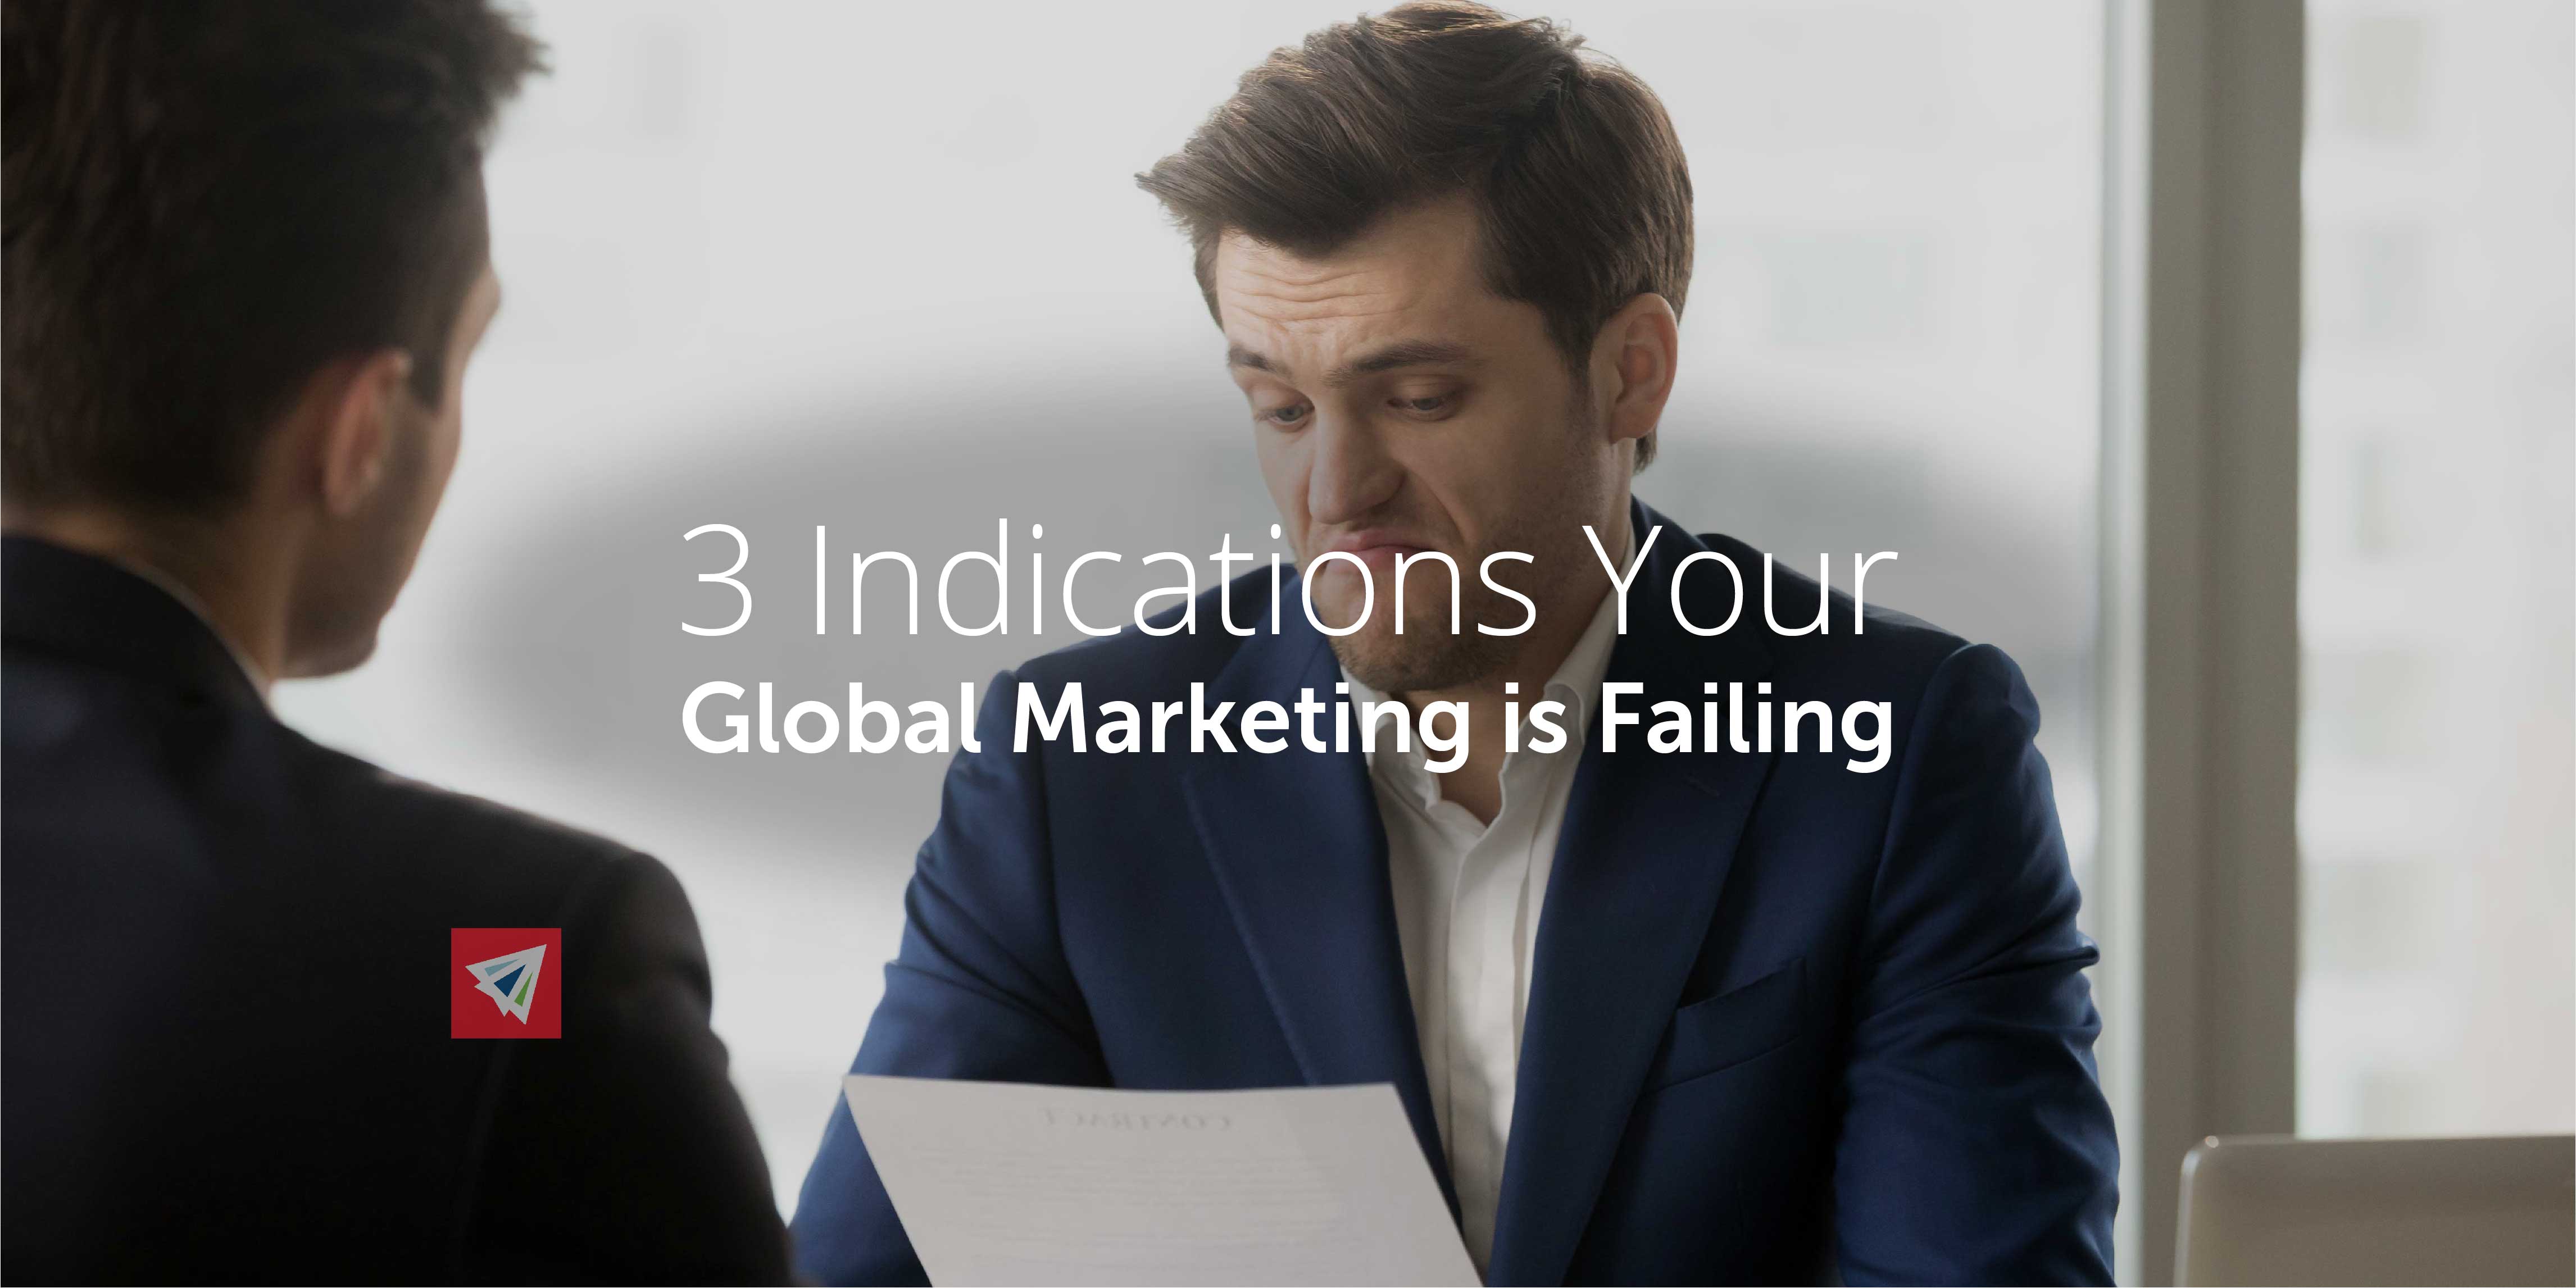 3 Indications Your Global Marketing is Failing